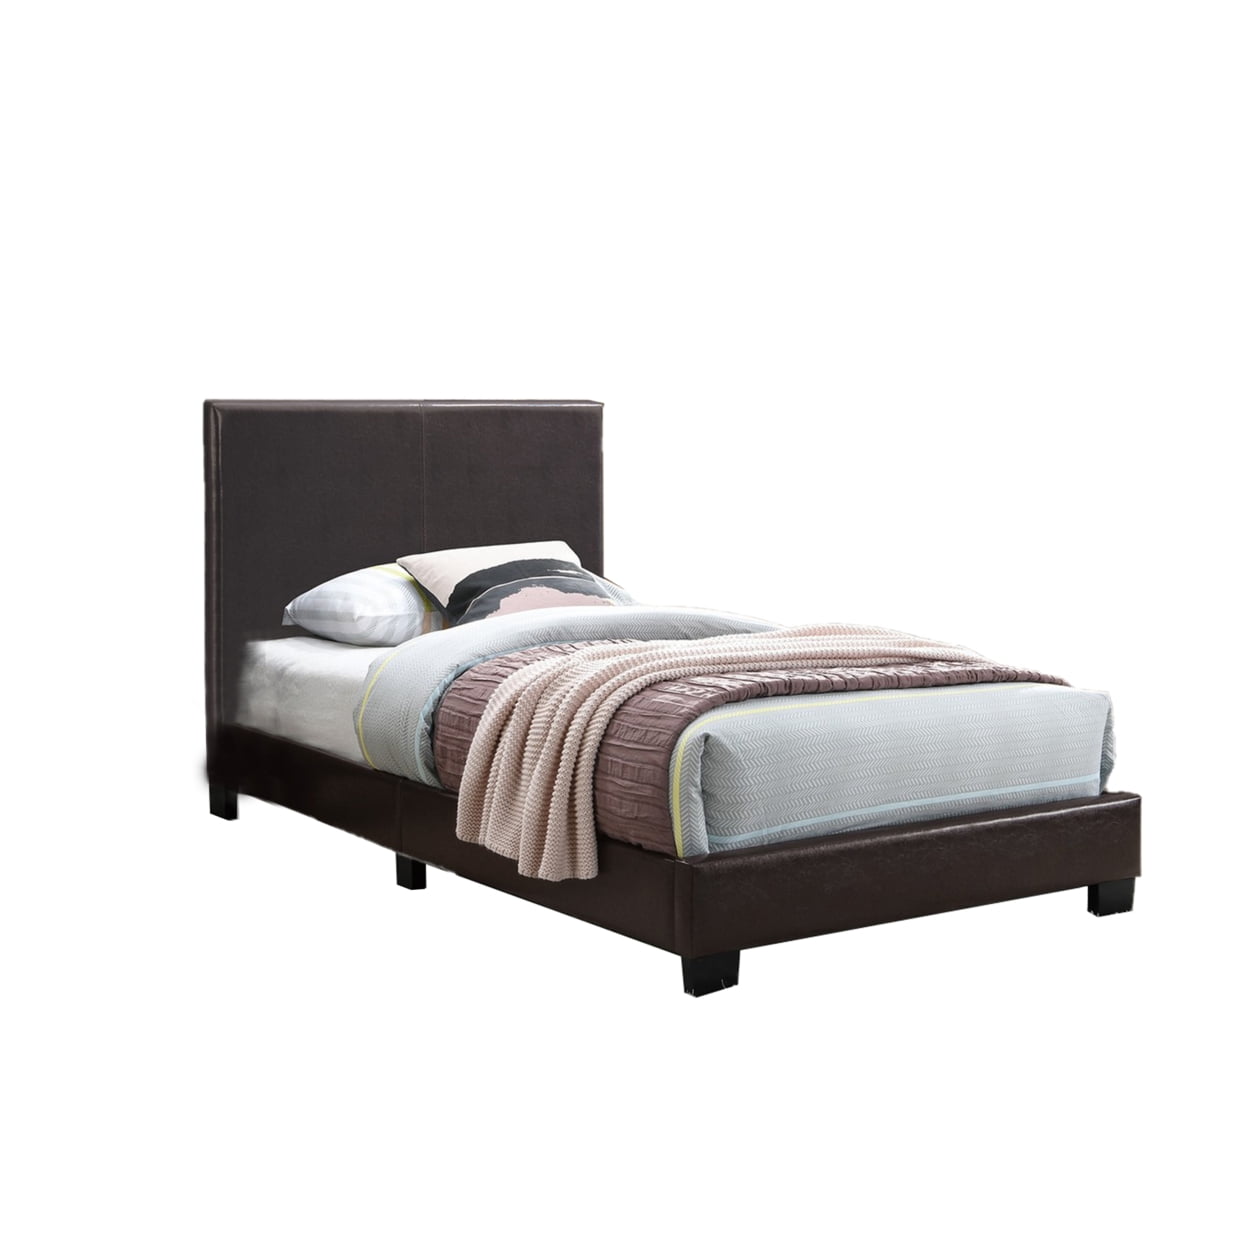 Bm232004 Transitional Style Leatherette Twin Bed With Padded Headboard, Dark Brown